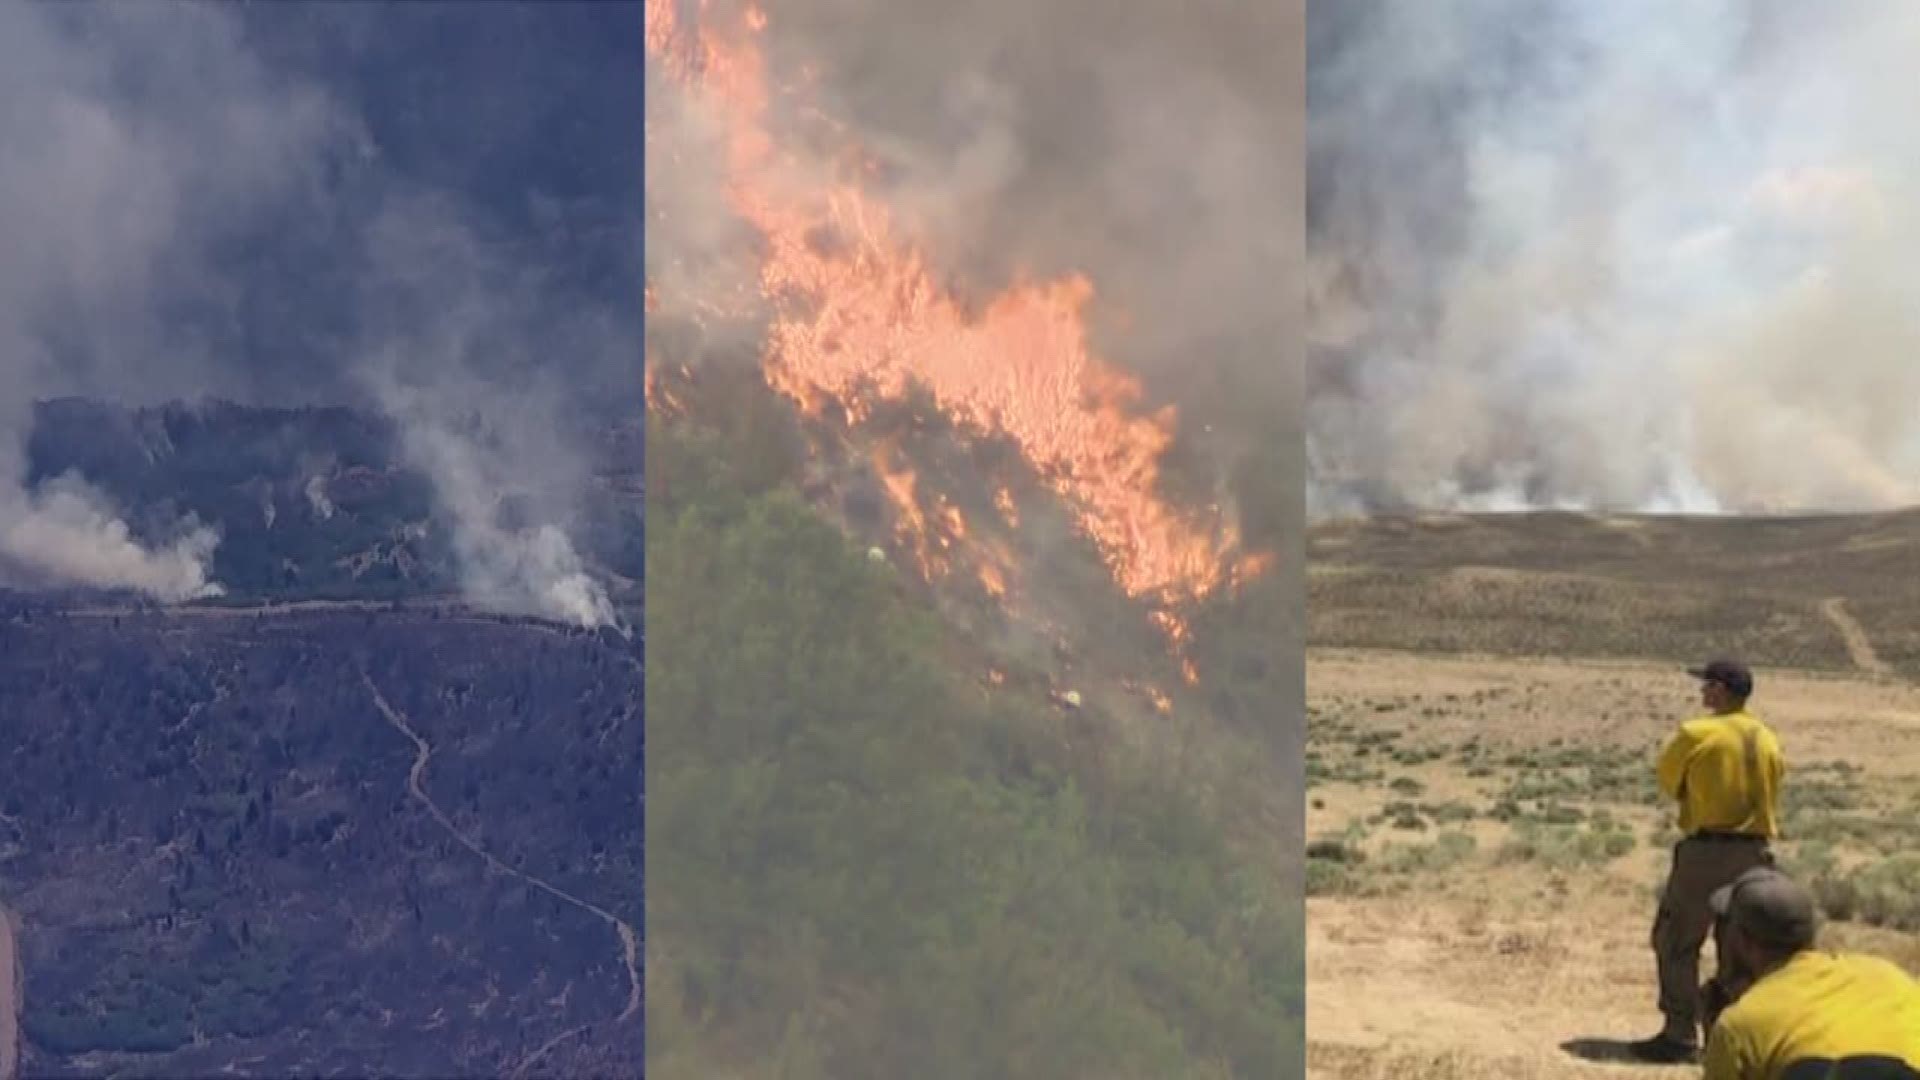 9NEWS has an interactive map with information about all of the wildfires reported in Colorado at any given time.